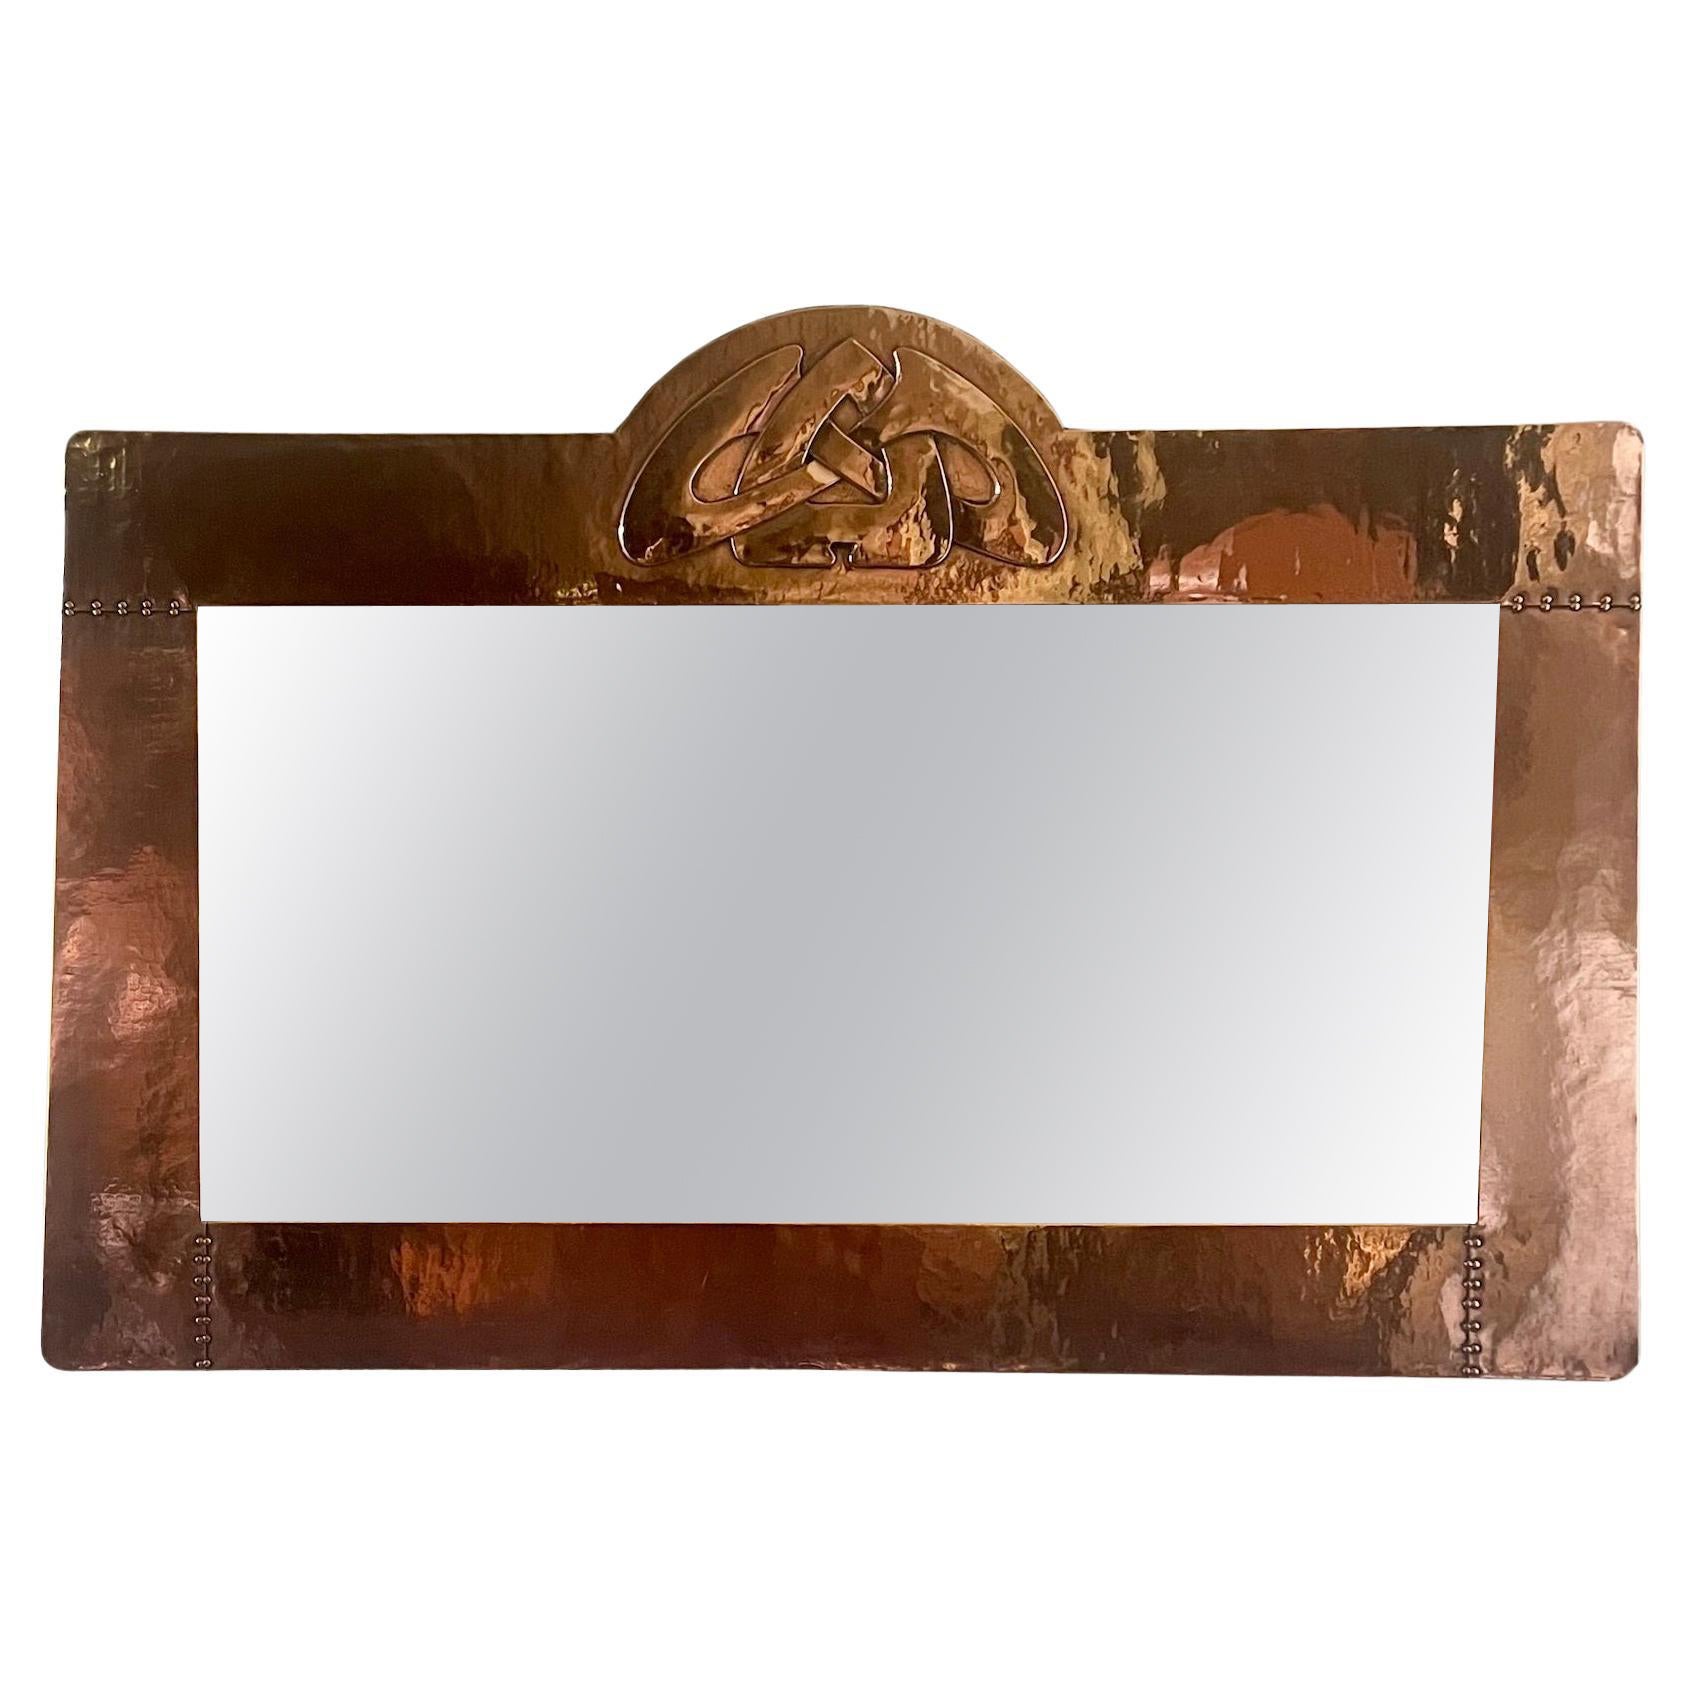 Arts & Crafts Copper Framed Mirror by Archibald Knox for Liberty & Co